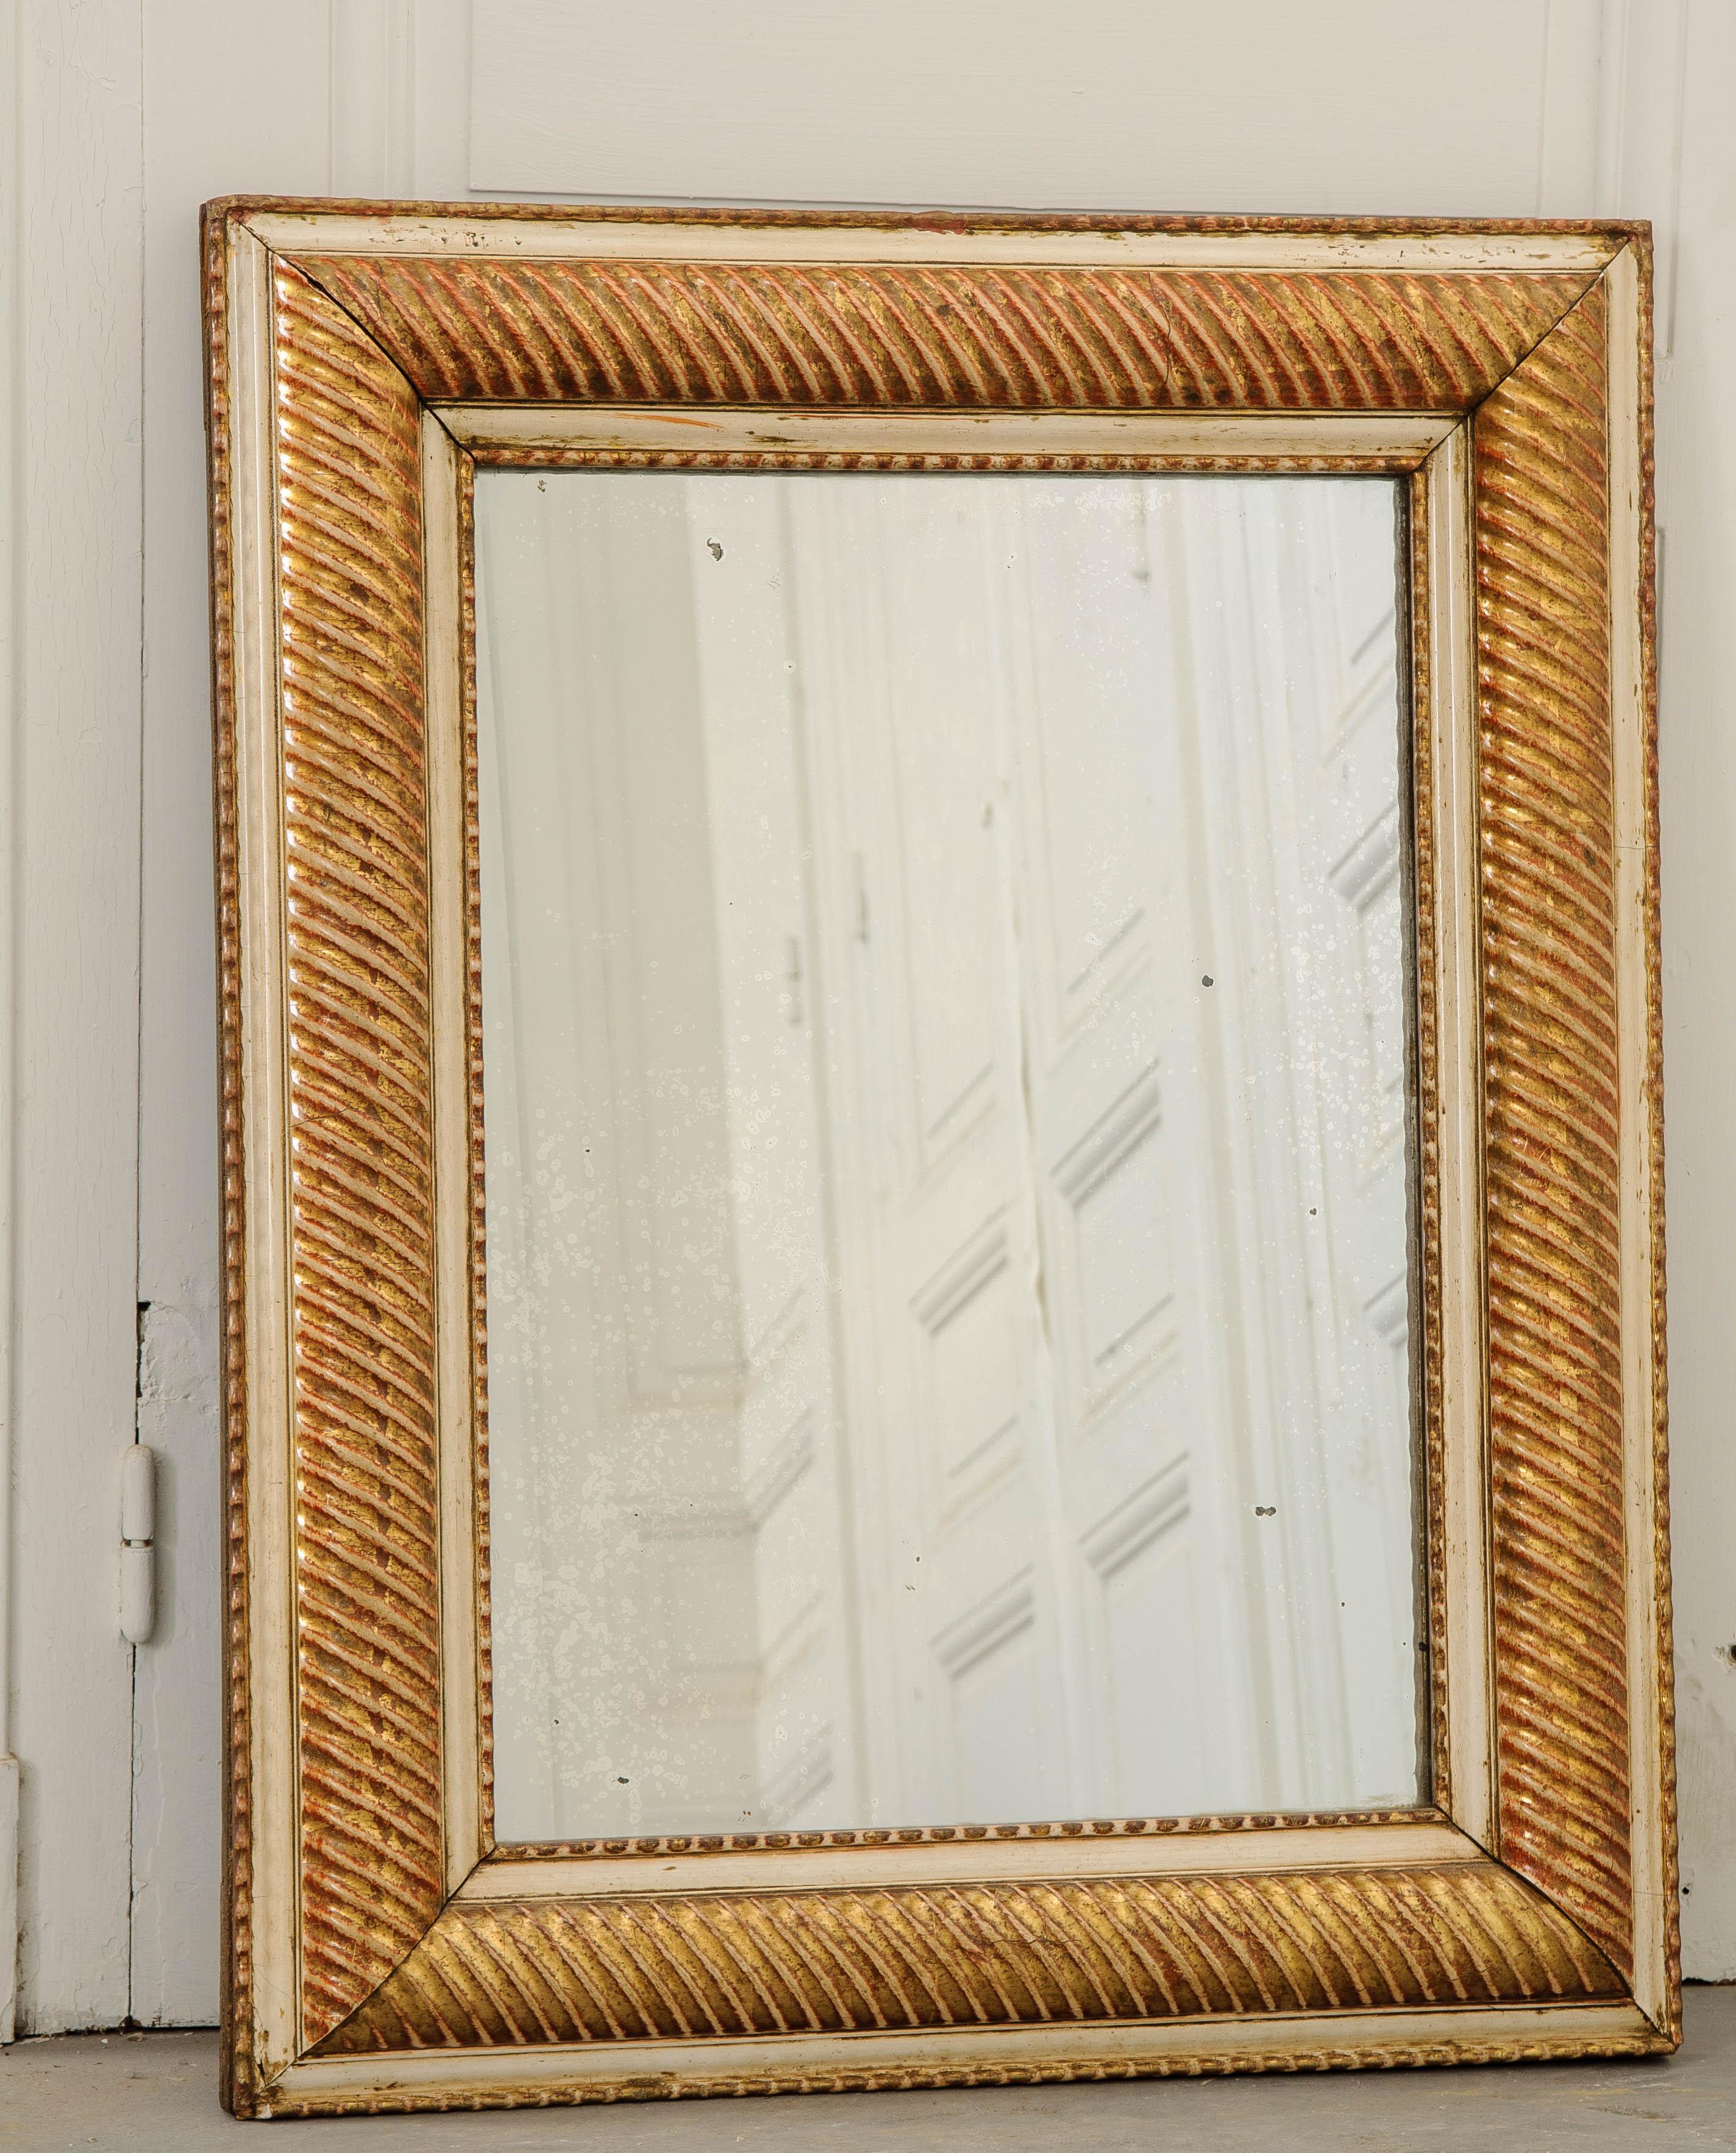 A lovely giltwood mirror, made in France, circa 1850. This rectilinear antique mirror has a thick frame with a unique design that encircles its entirety. The frame was designed with a corkscrewed motif that sees diagonally oriented ribbings